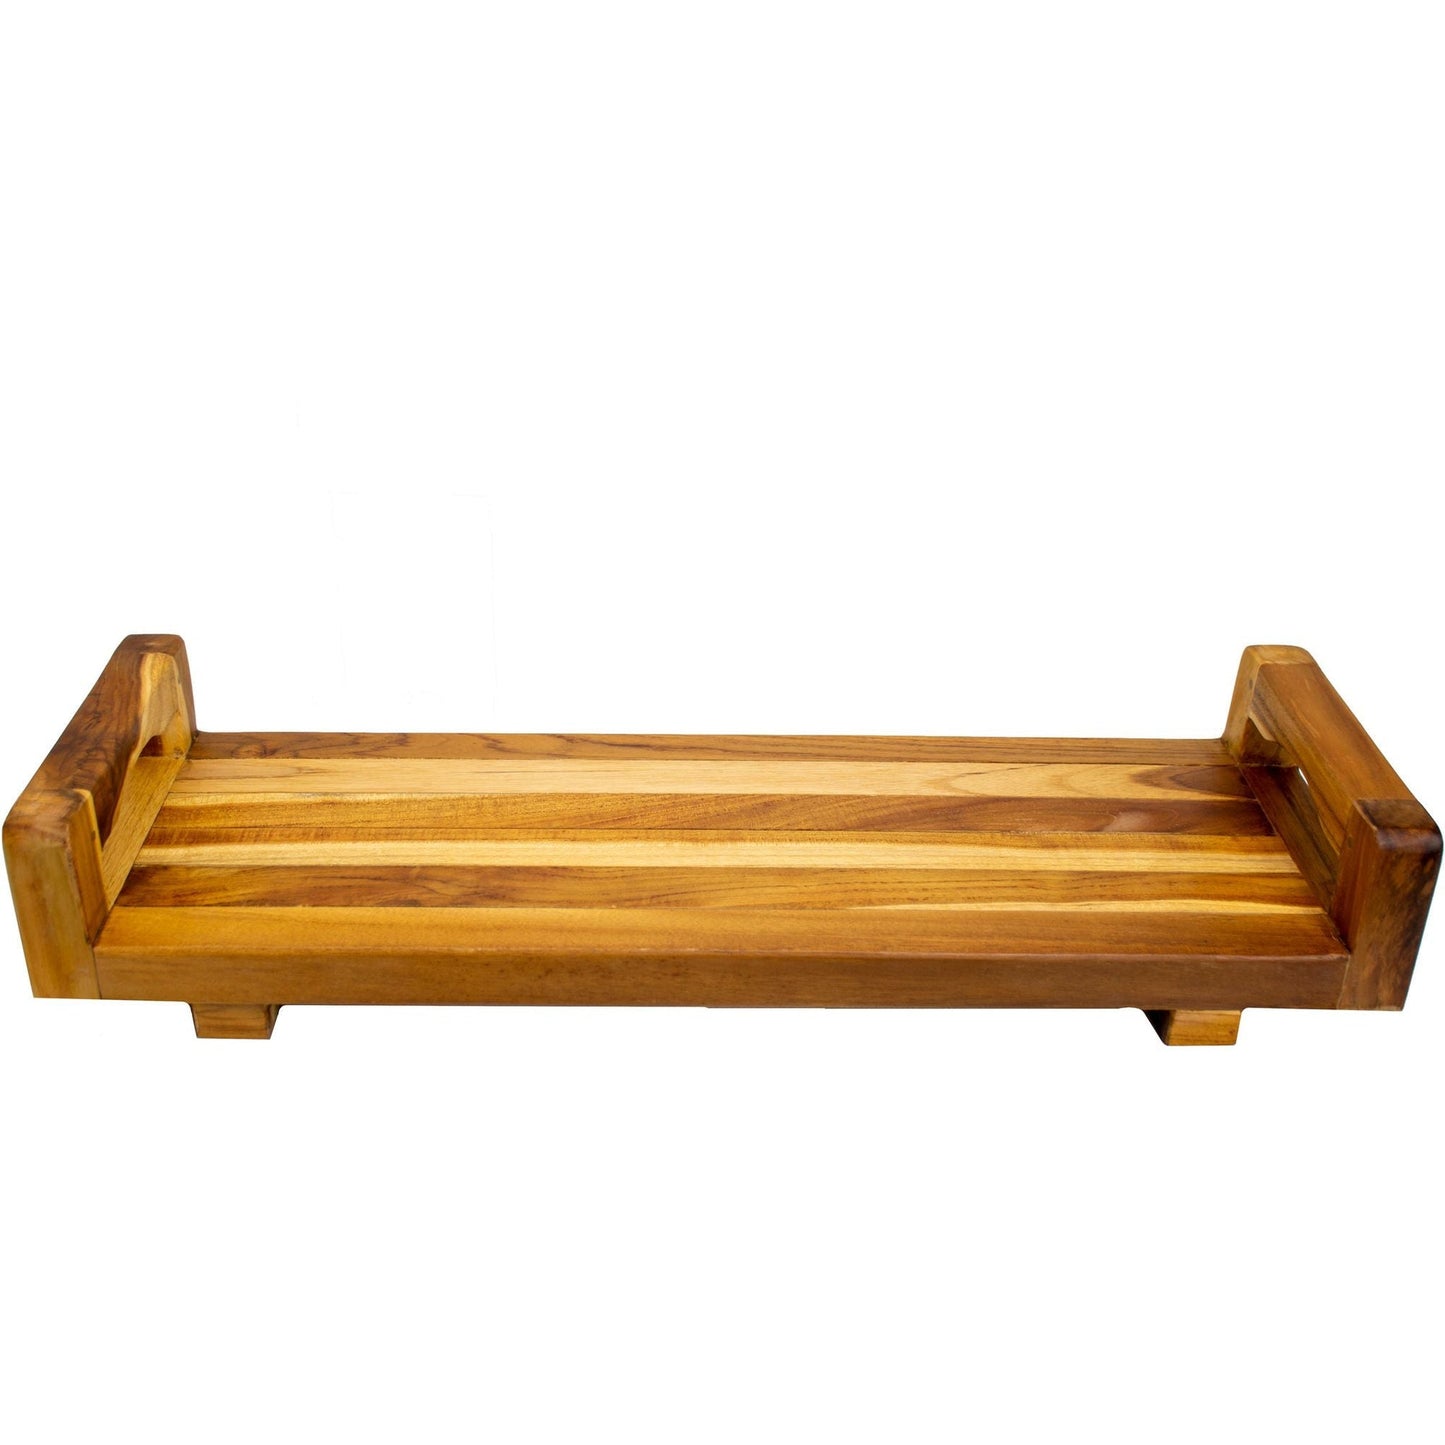 EcoDecors Eleganto 29" EarthyTeak Solid Teak Wood Bath Tray and Seat With LiftAide Arms